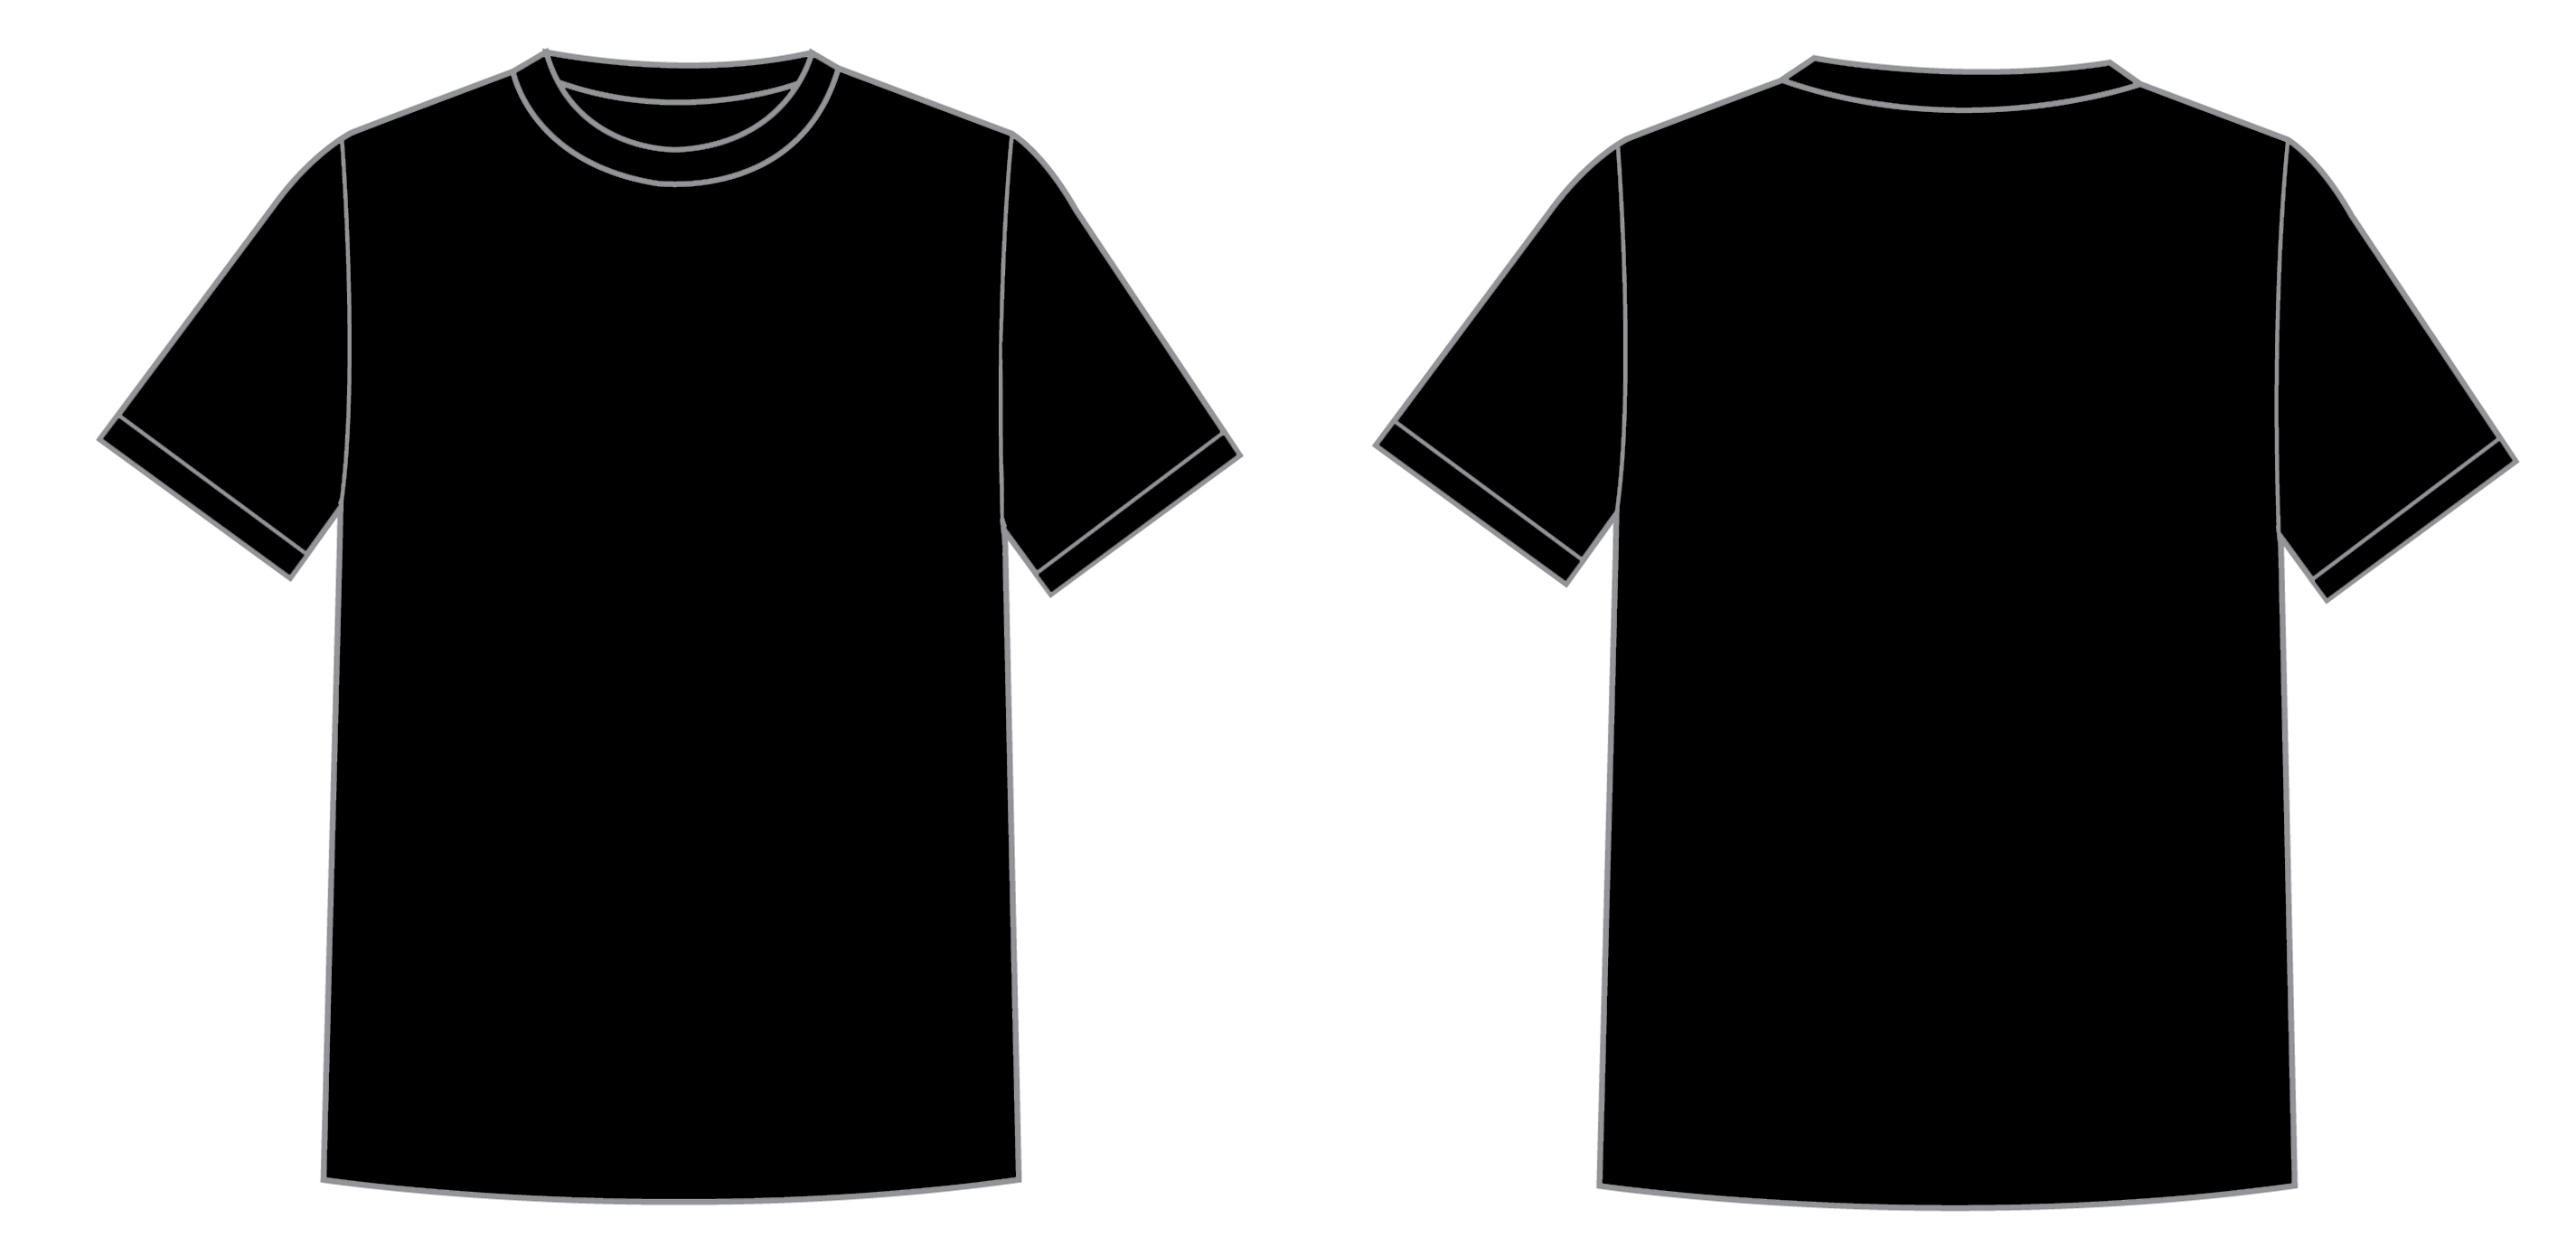 393-blank-black-t-shirt-front-and-back-template-photoshop-file